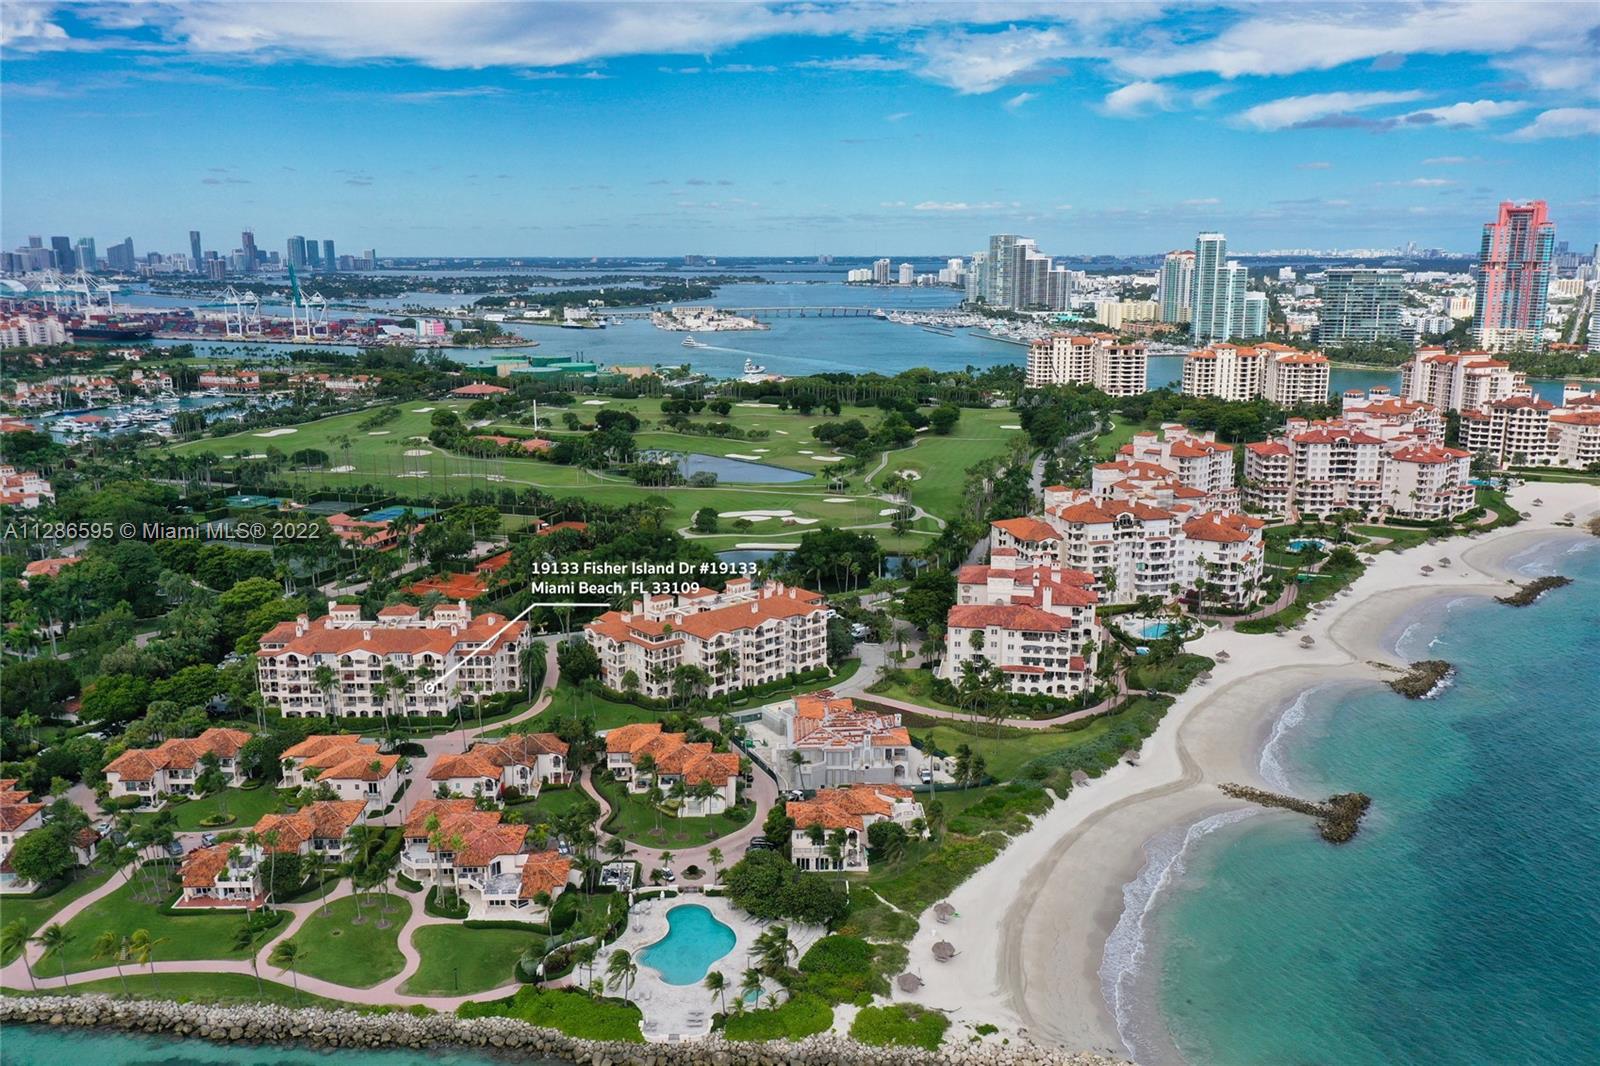 Property for Sale at 19133 Fisher Island Dr 19133, Miami Beach, Miami-Dade County, Florida - Bedrooms: 2 
Bathrooms: 2  - $3,590,000